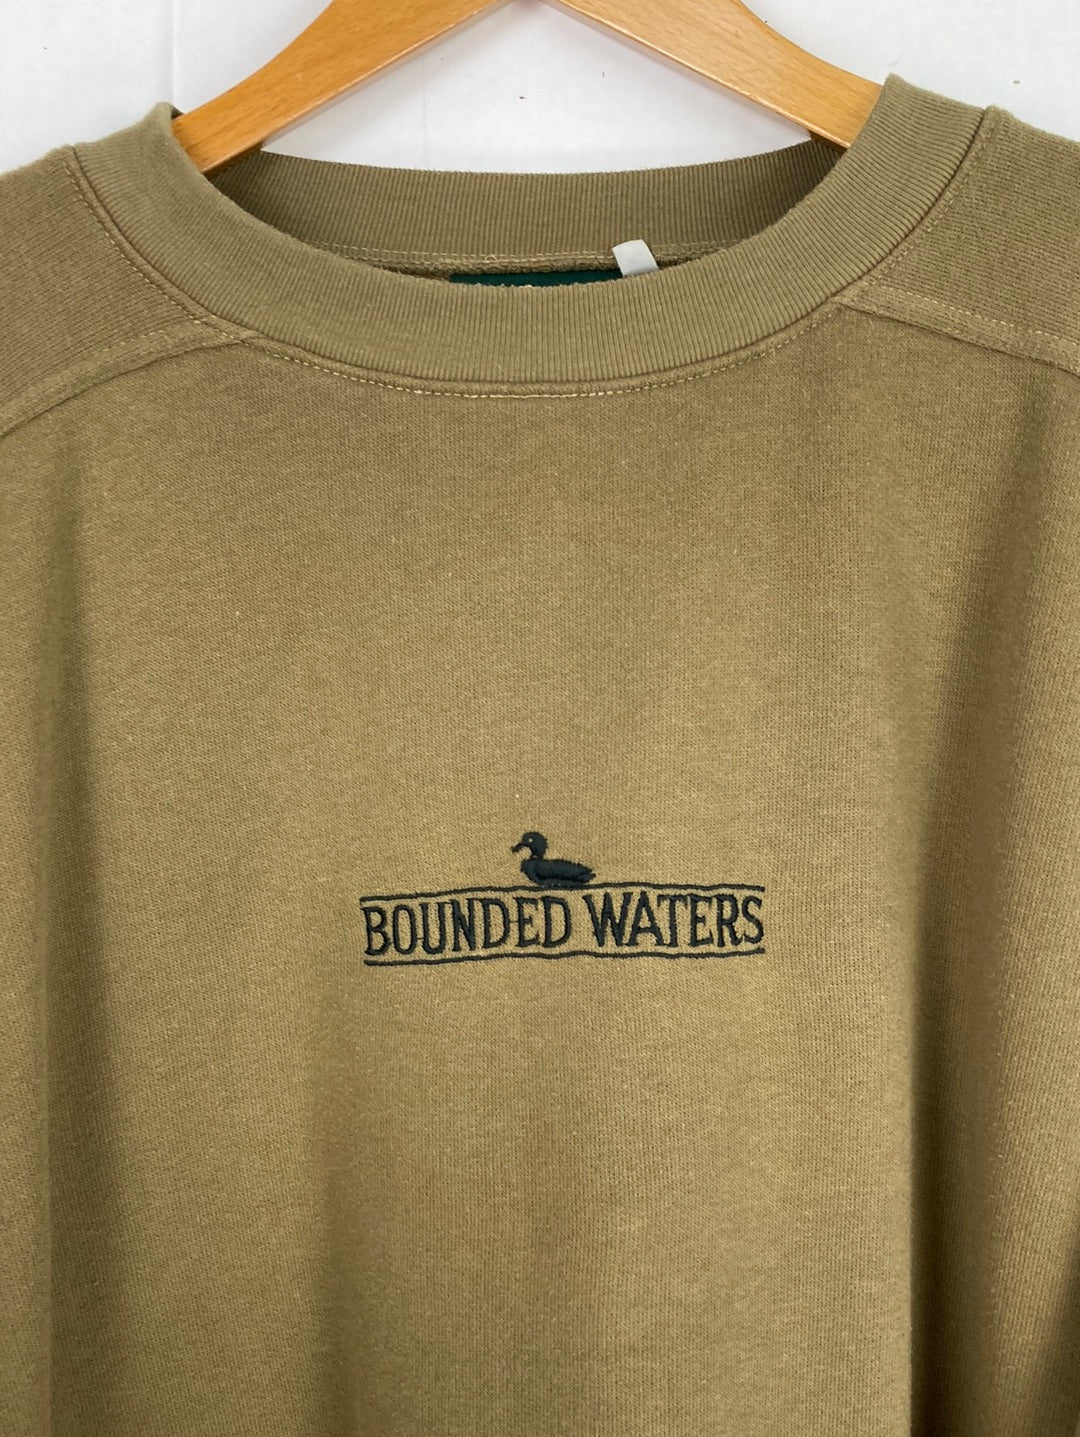 Bounded Waters Sweater (XL)